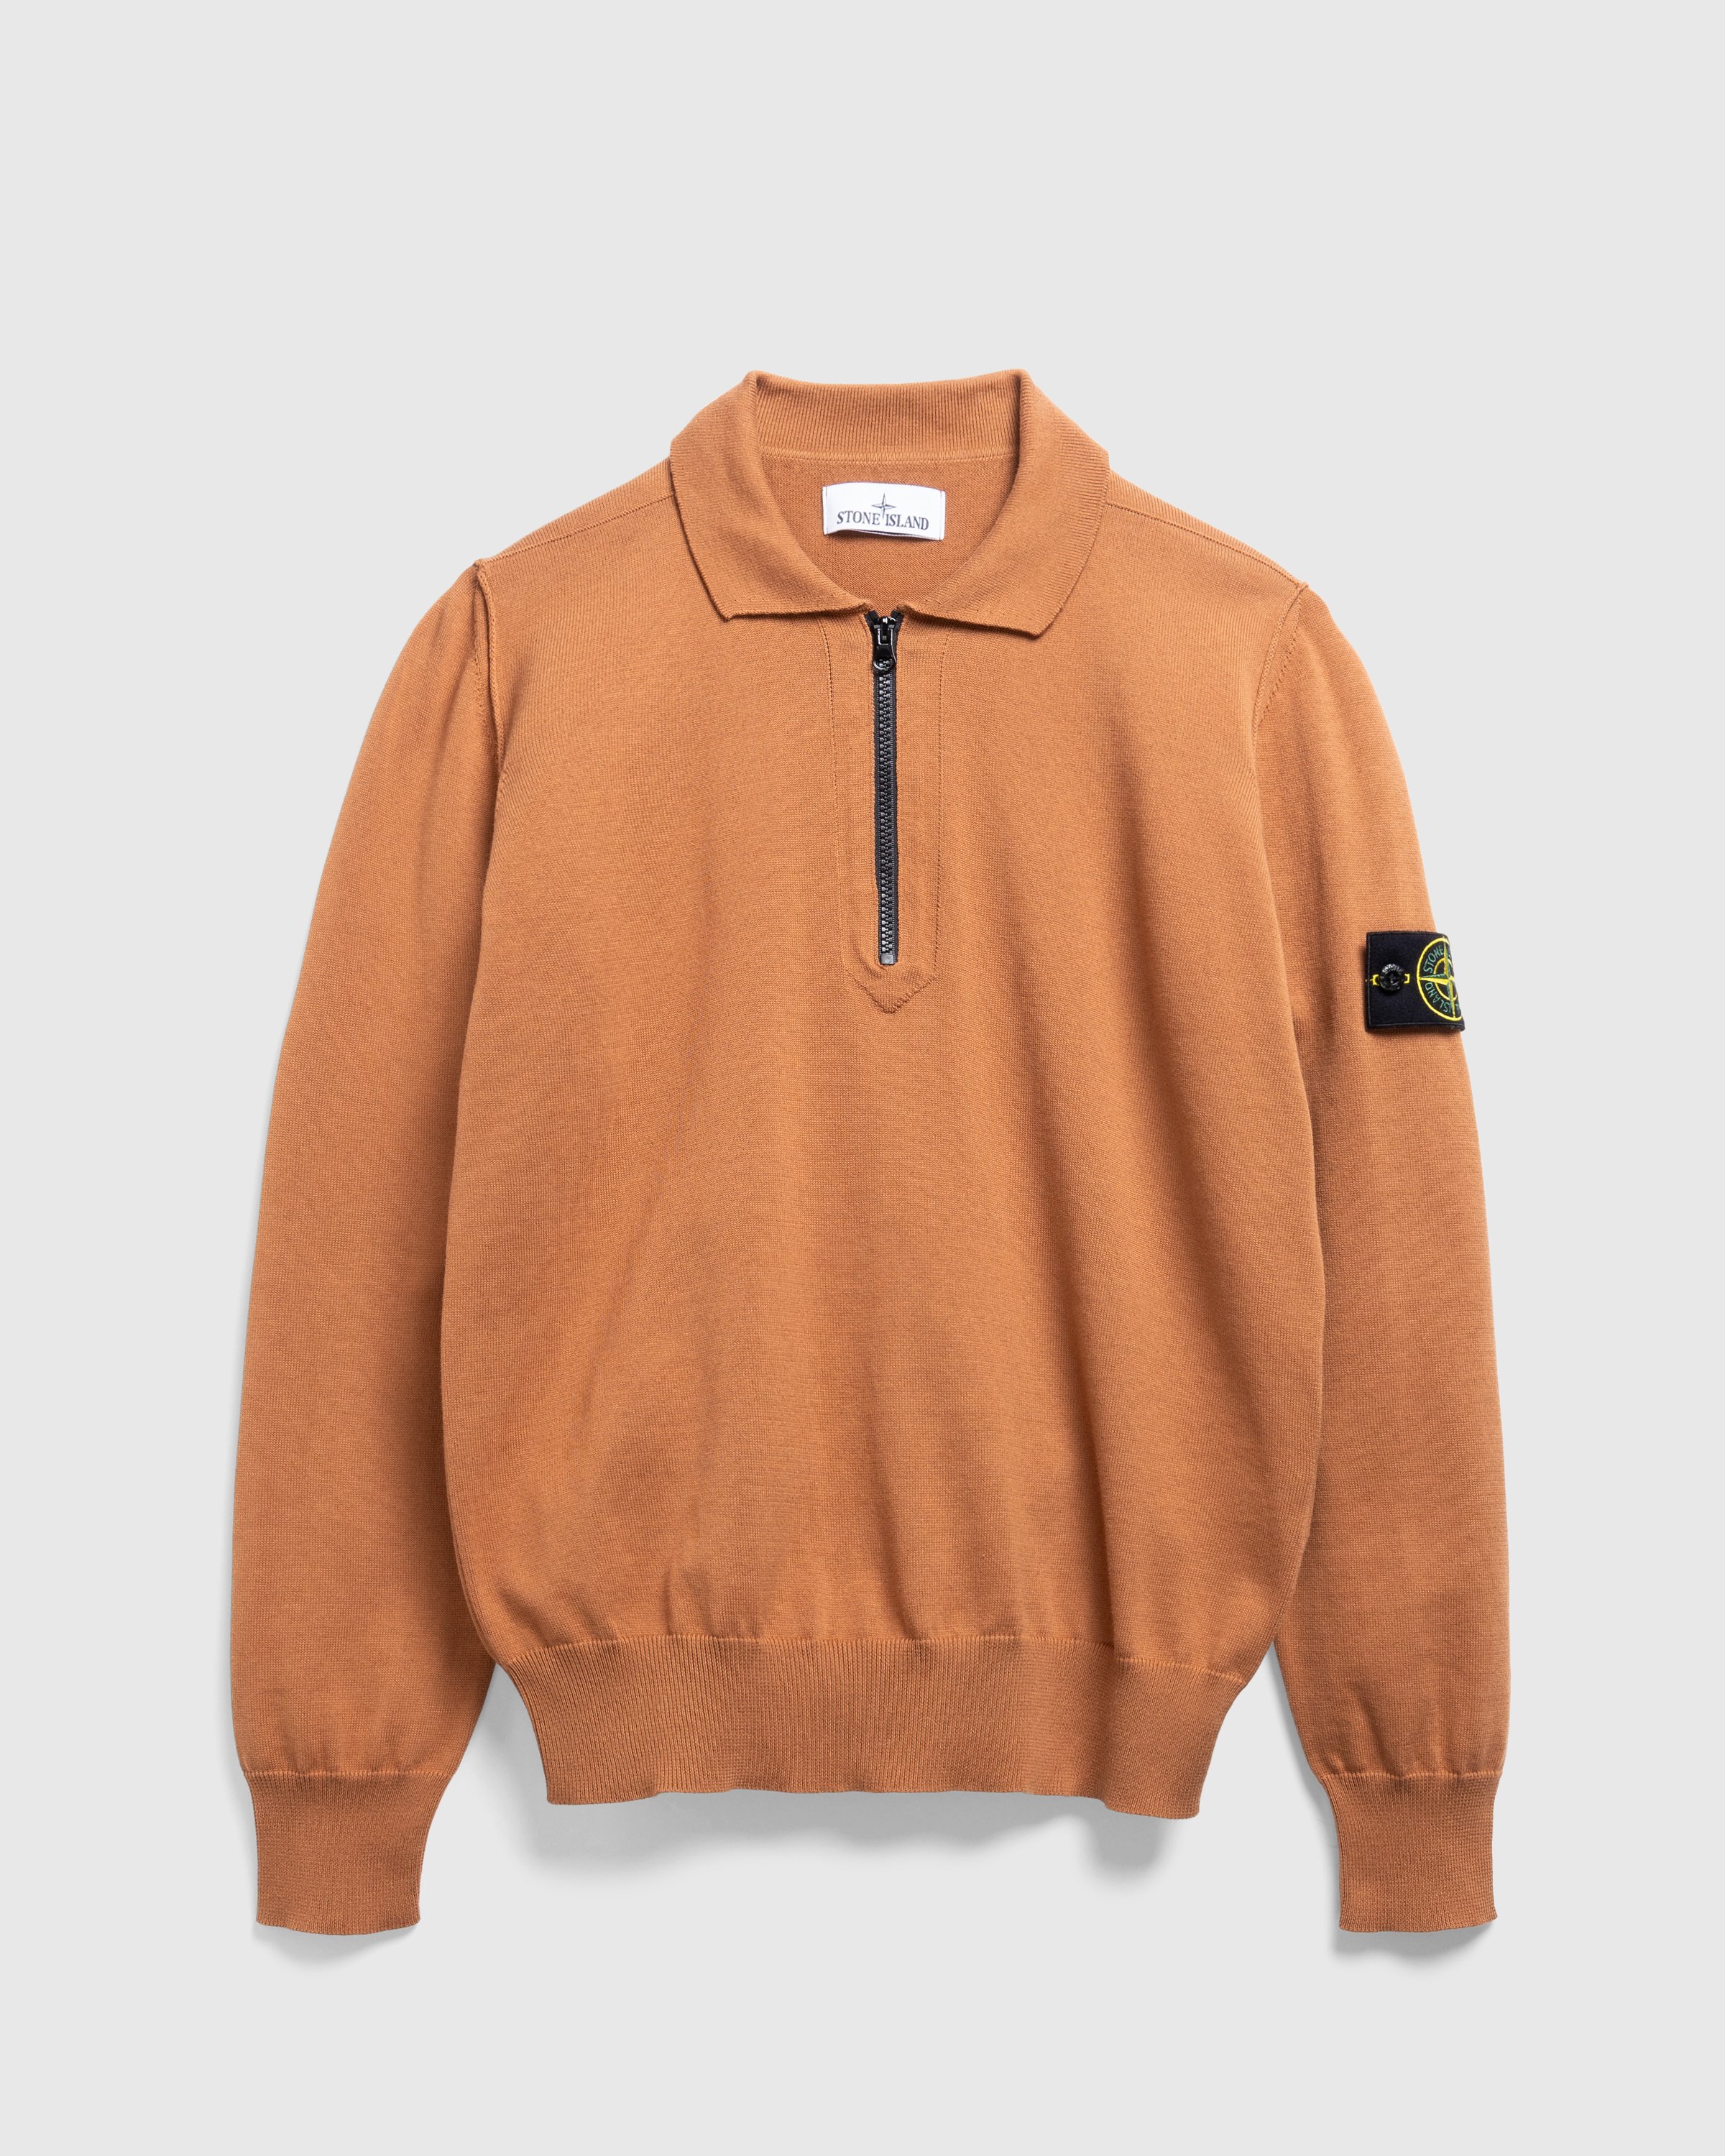 Stone Island - KNITWEAR RUST - Clothing - Red - Image 1